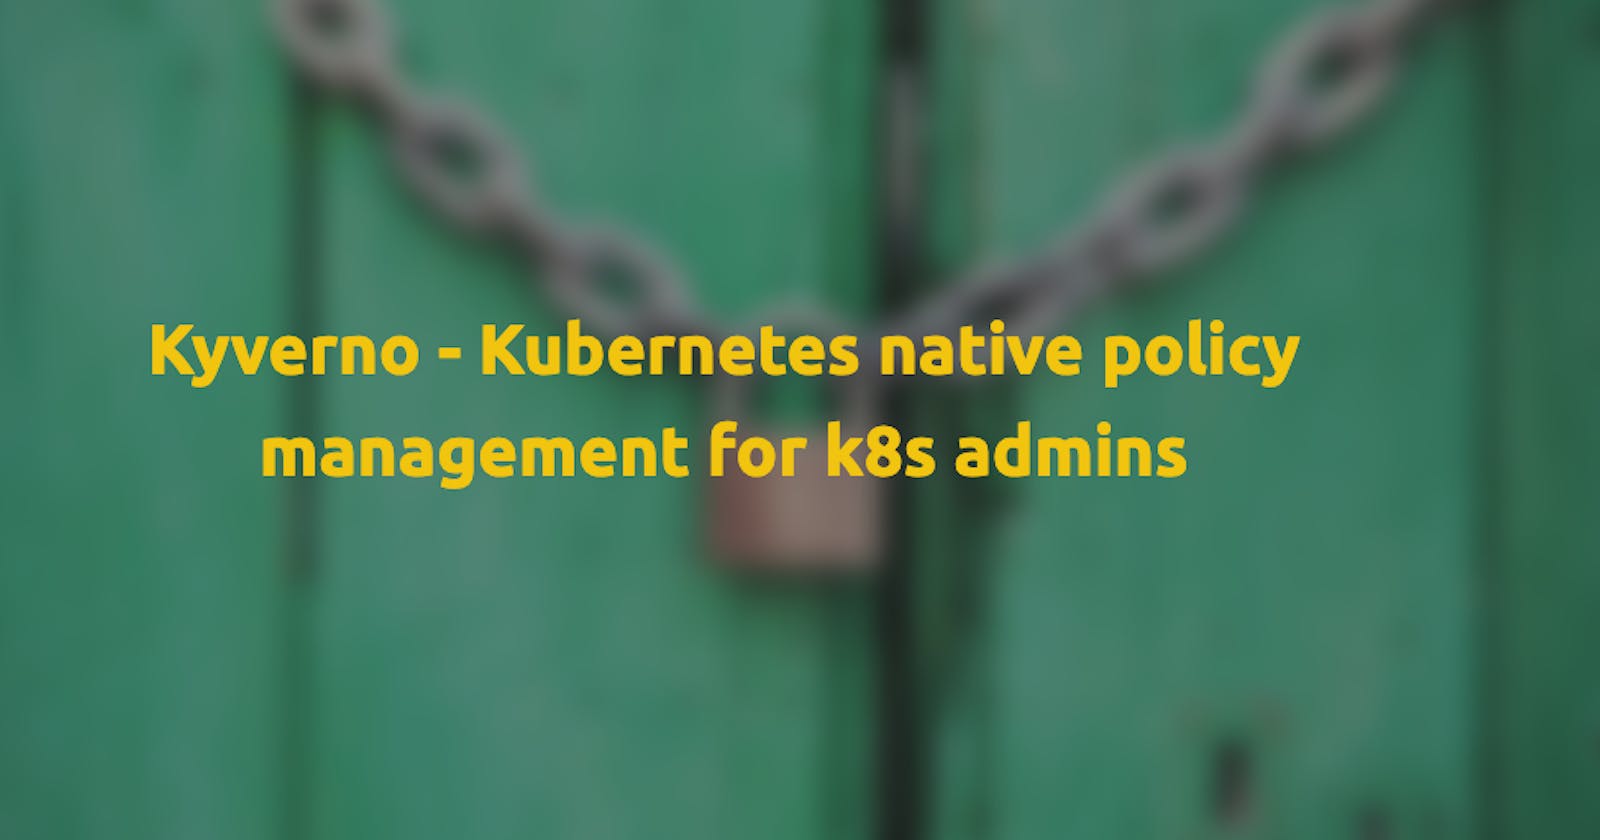 Kyverno - Kubernetes native policy management for k8s admins